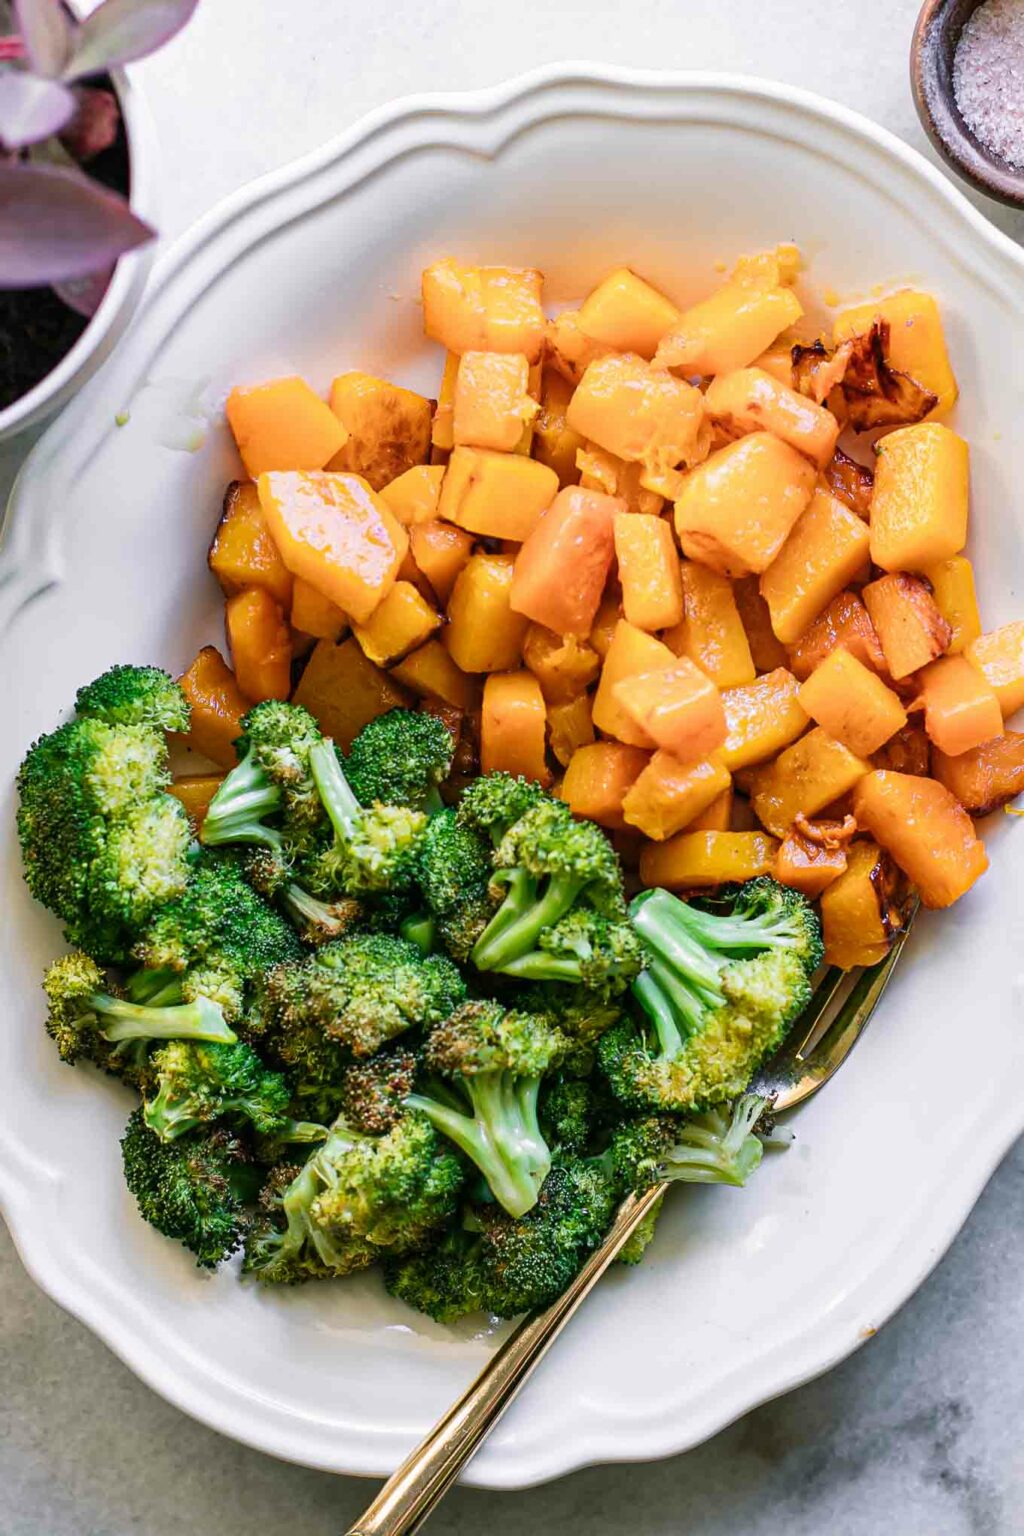 Roasted Butternut Squash and Broccoli ⋆ Fork in the Road